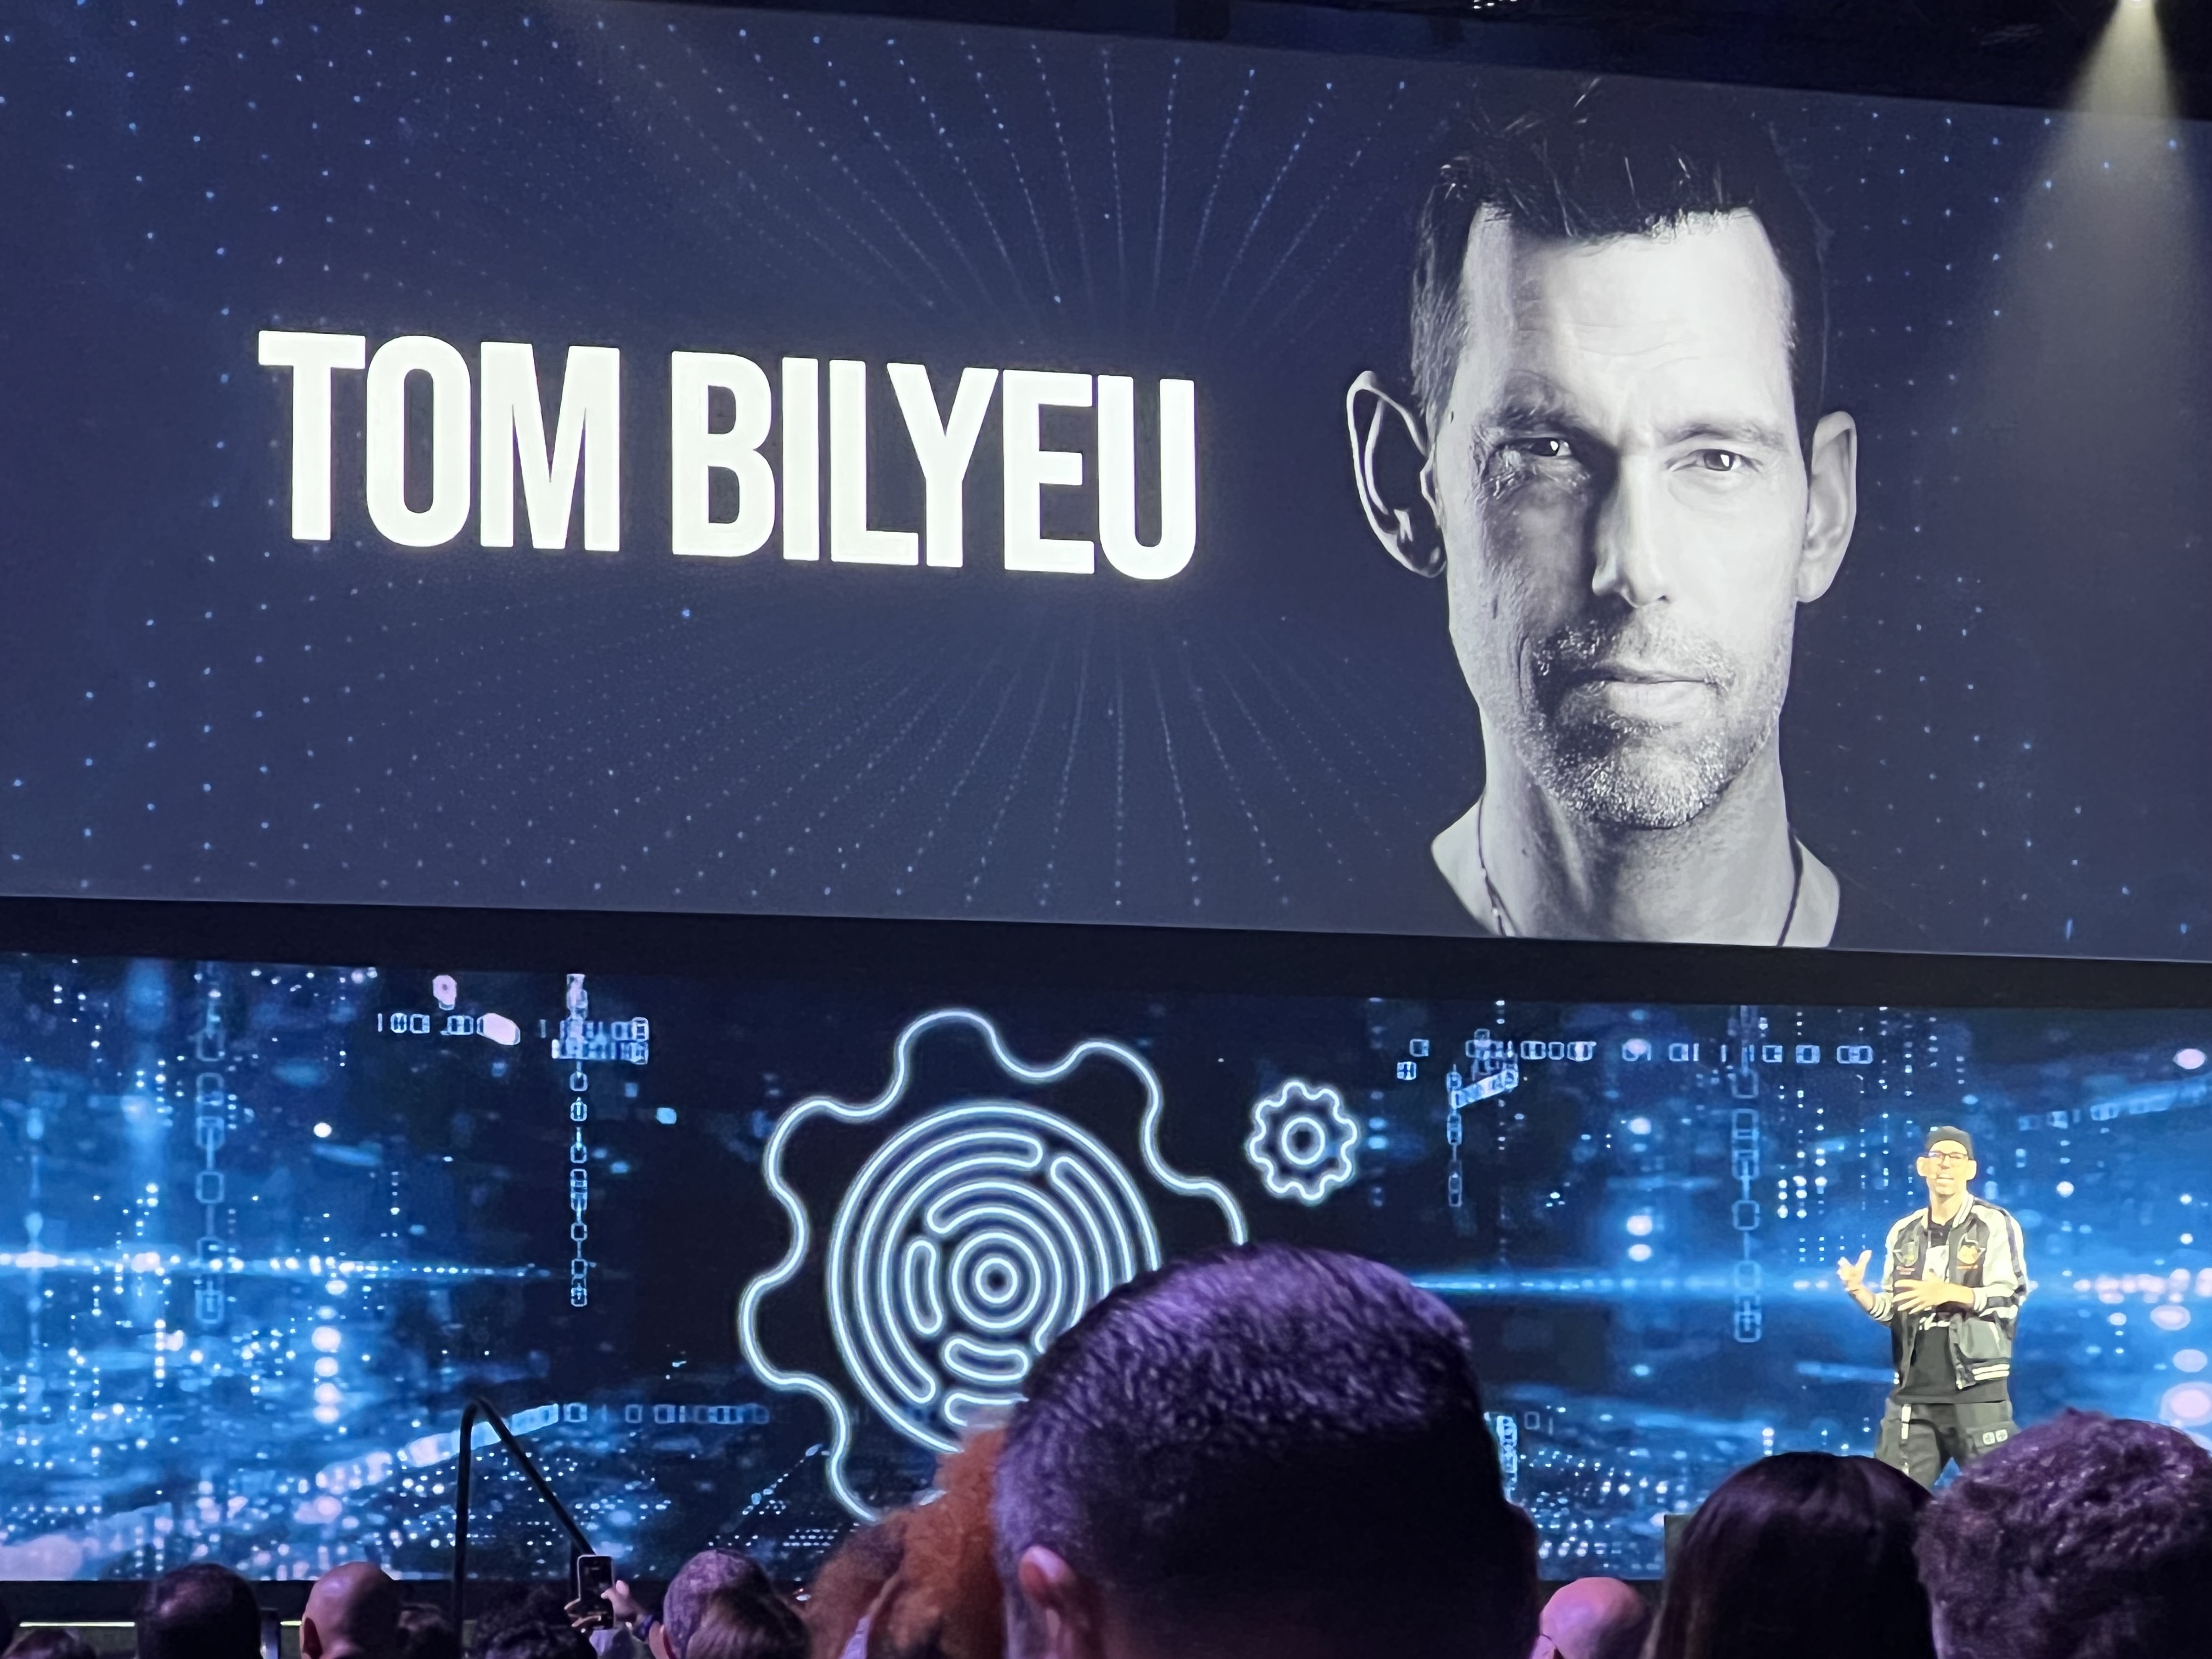 Tom Bilyeu on stage with a screen advertising him